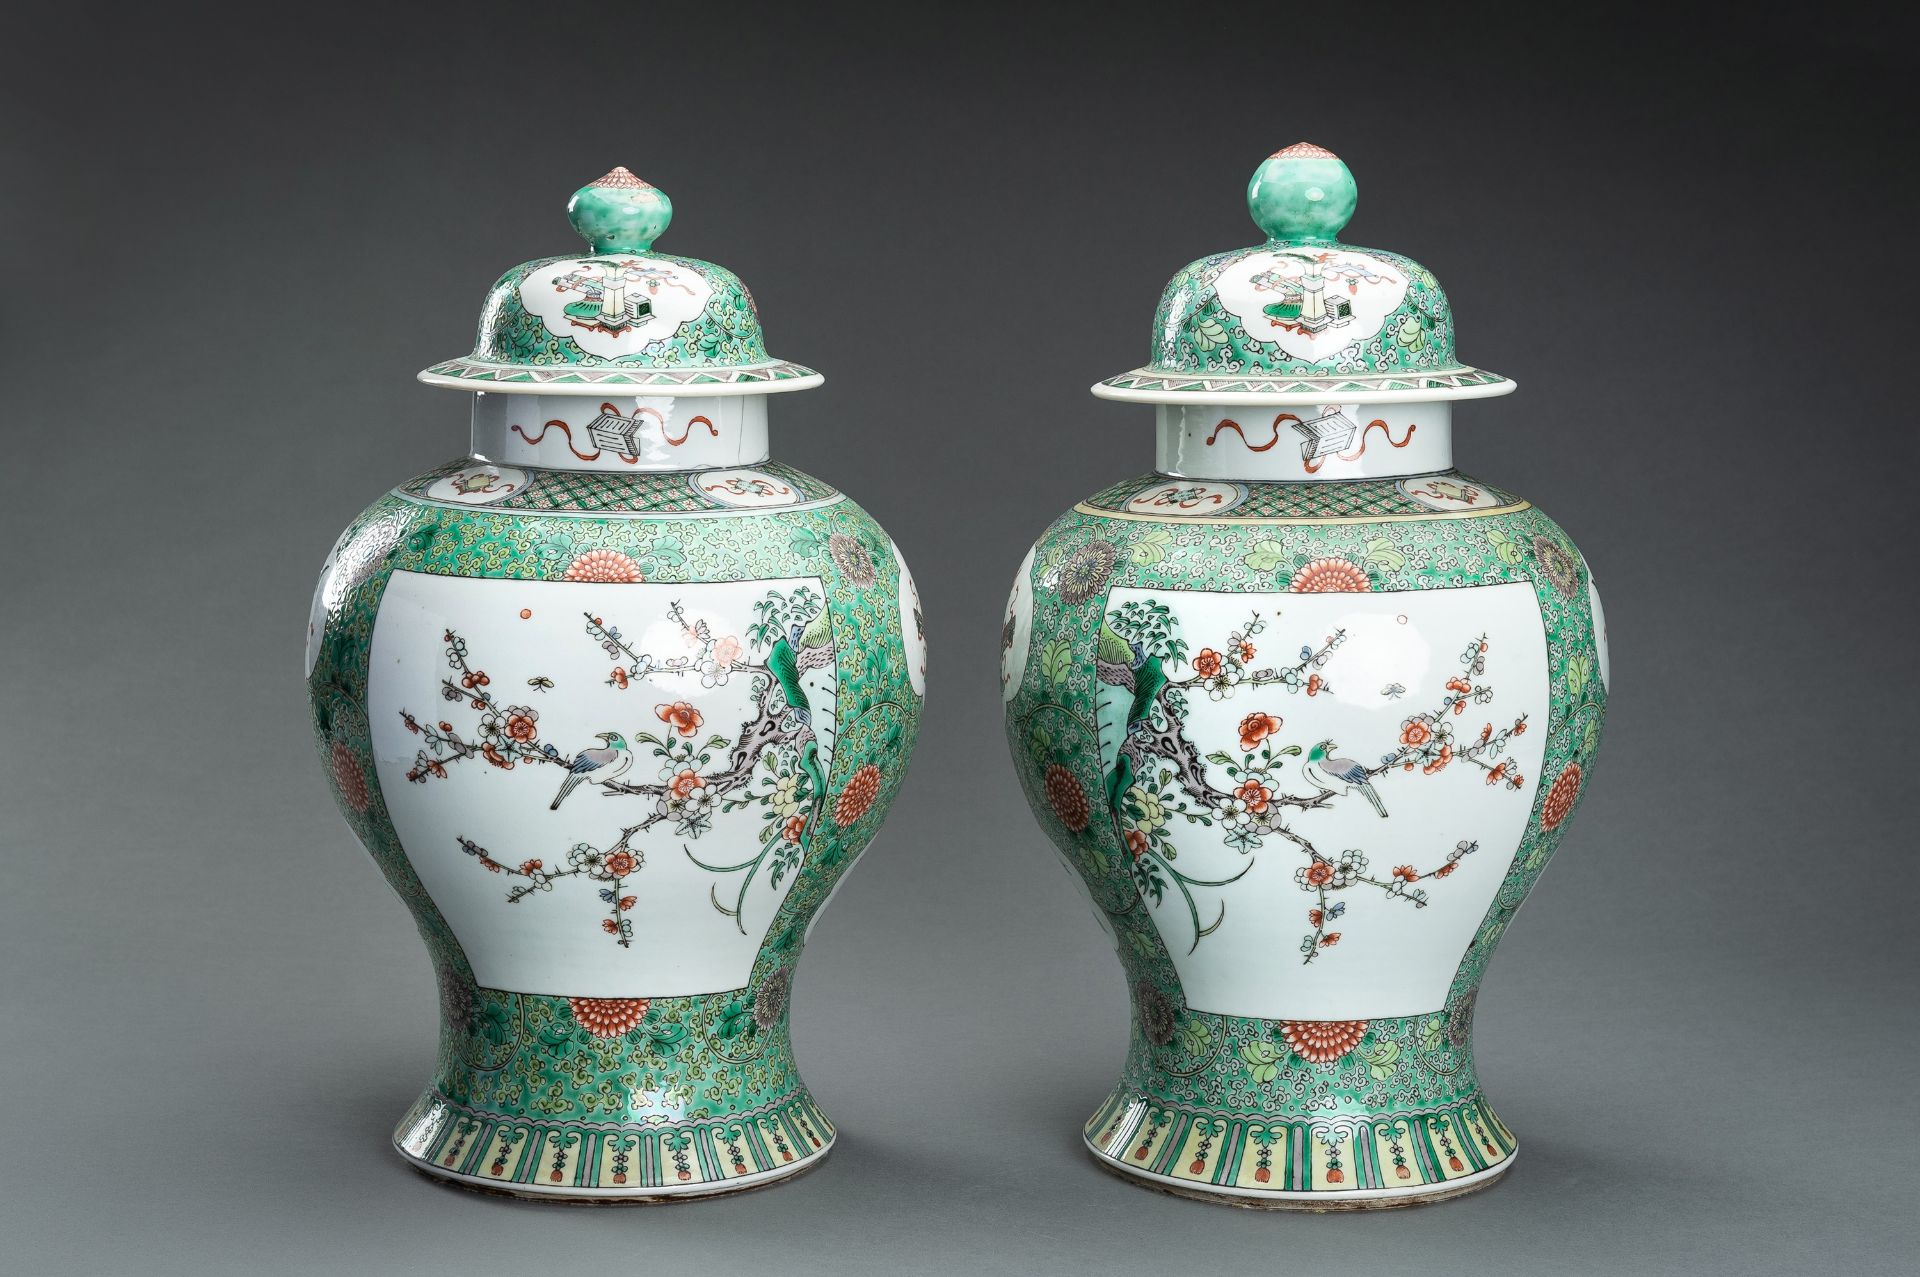 A LARGE PAIR OF FAMILLE VERTE PORCELAIN VASES WITH COVERS, 19th CENTURY